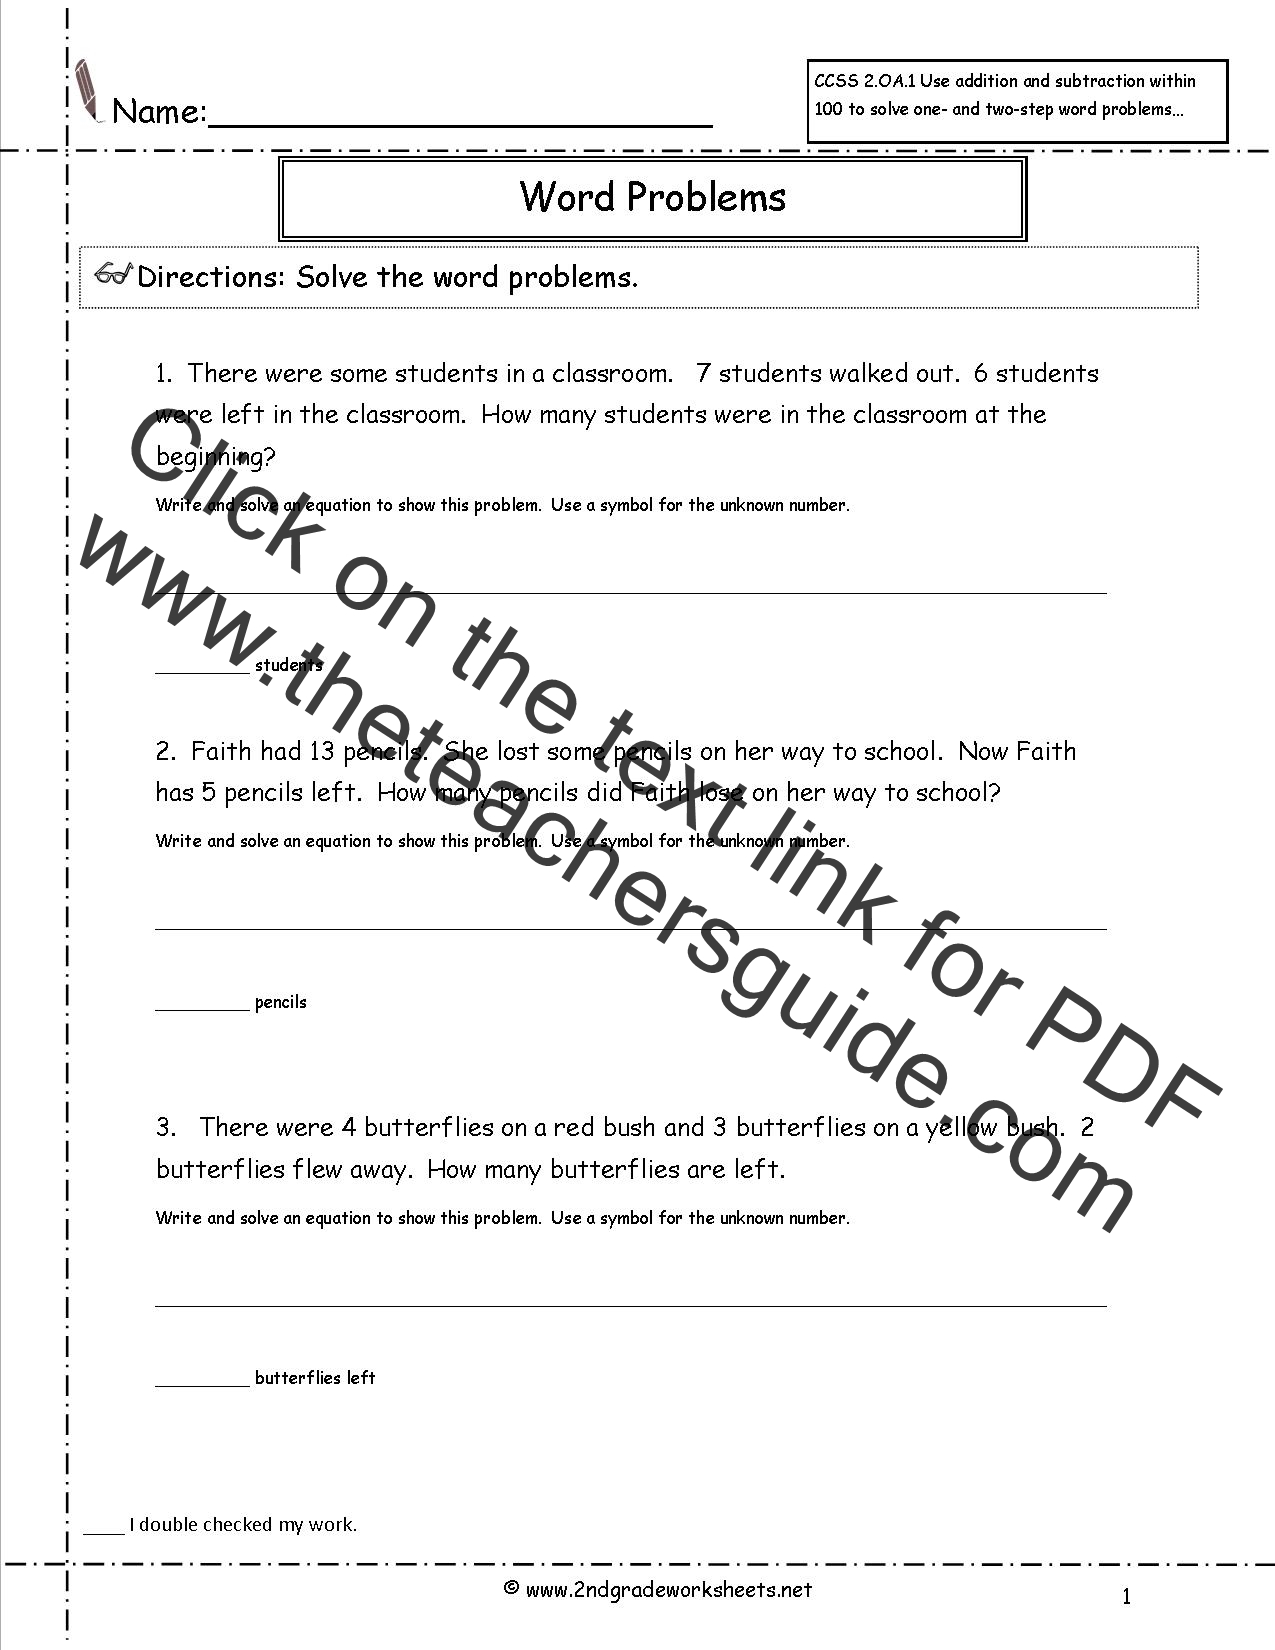 CCSS 22.OA.22 Worksheets. Addition and Subtraction Word Problems For Algebra 1 Word Problems Worksheet